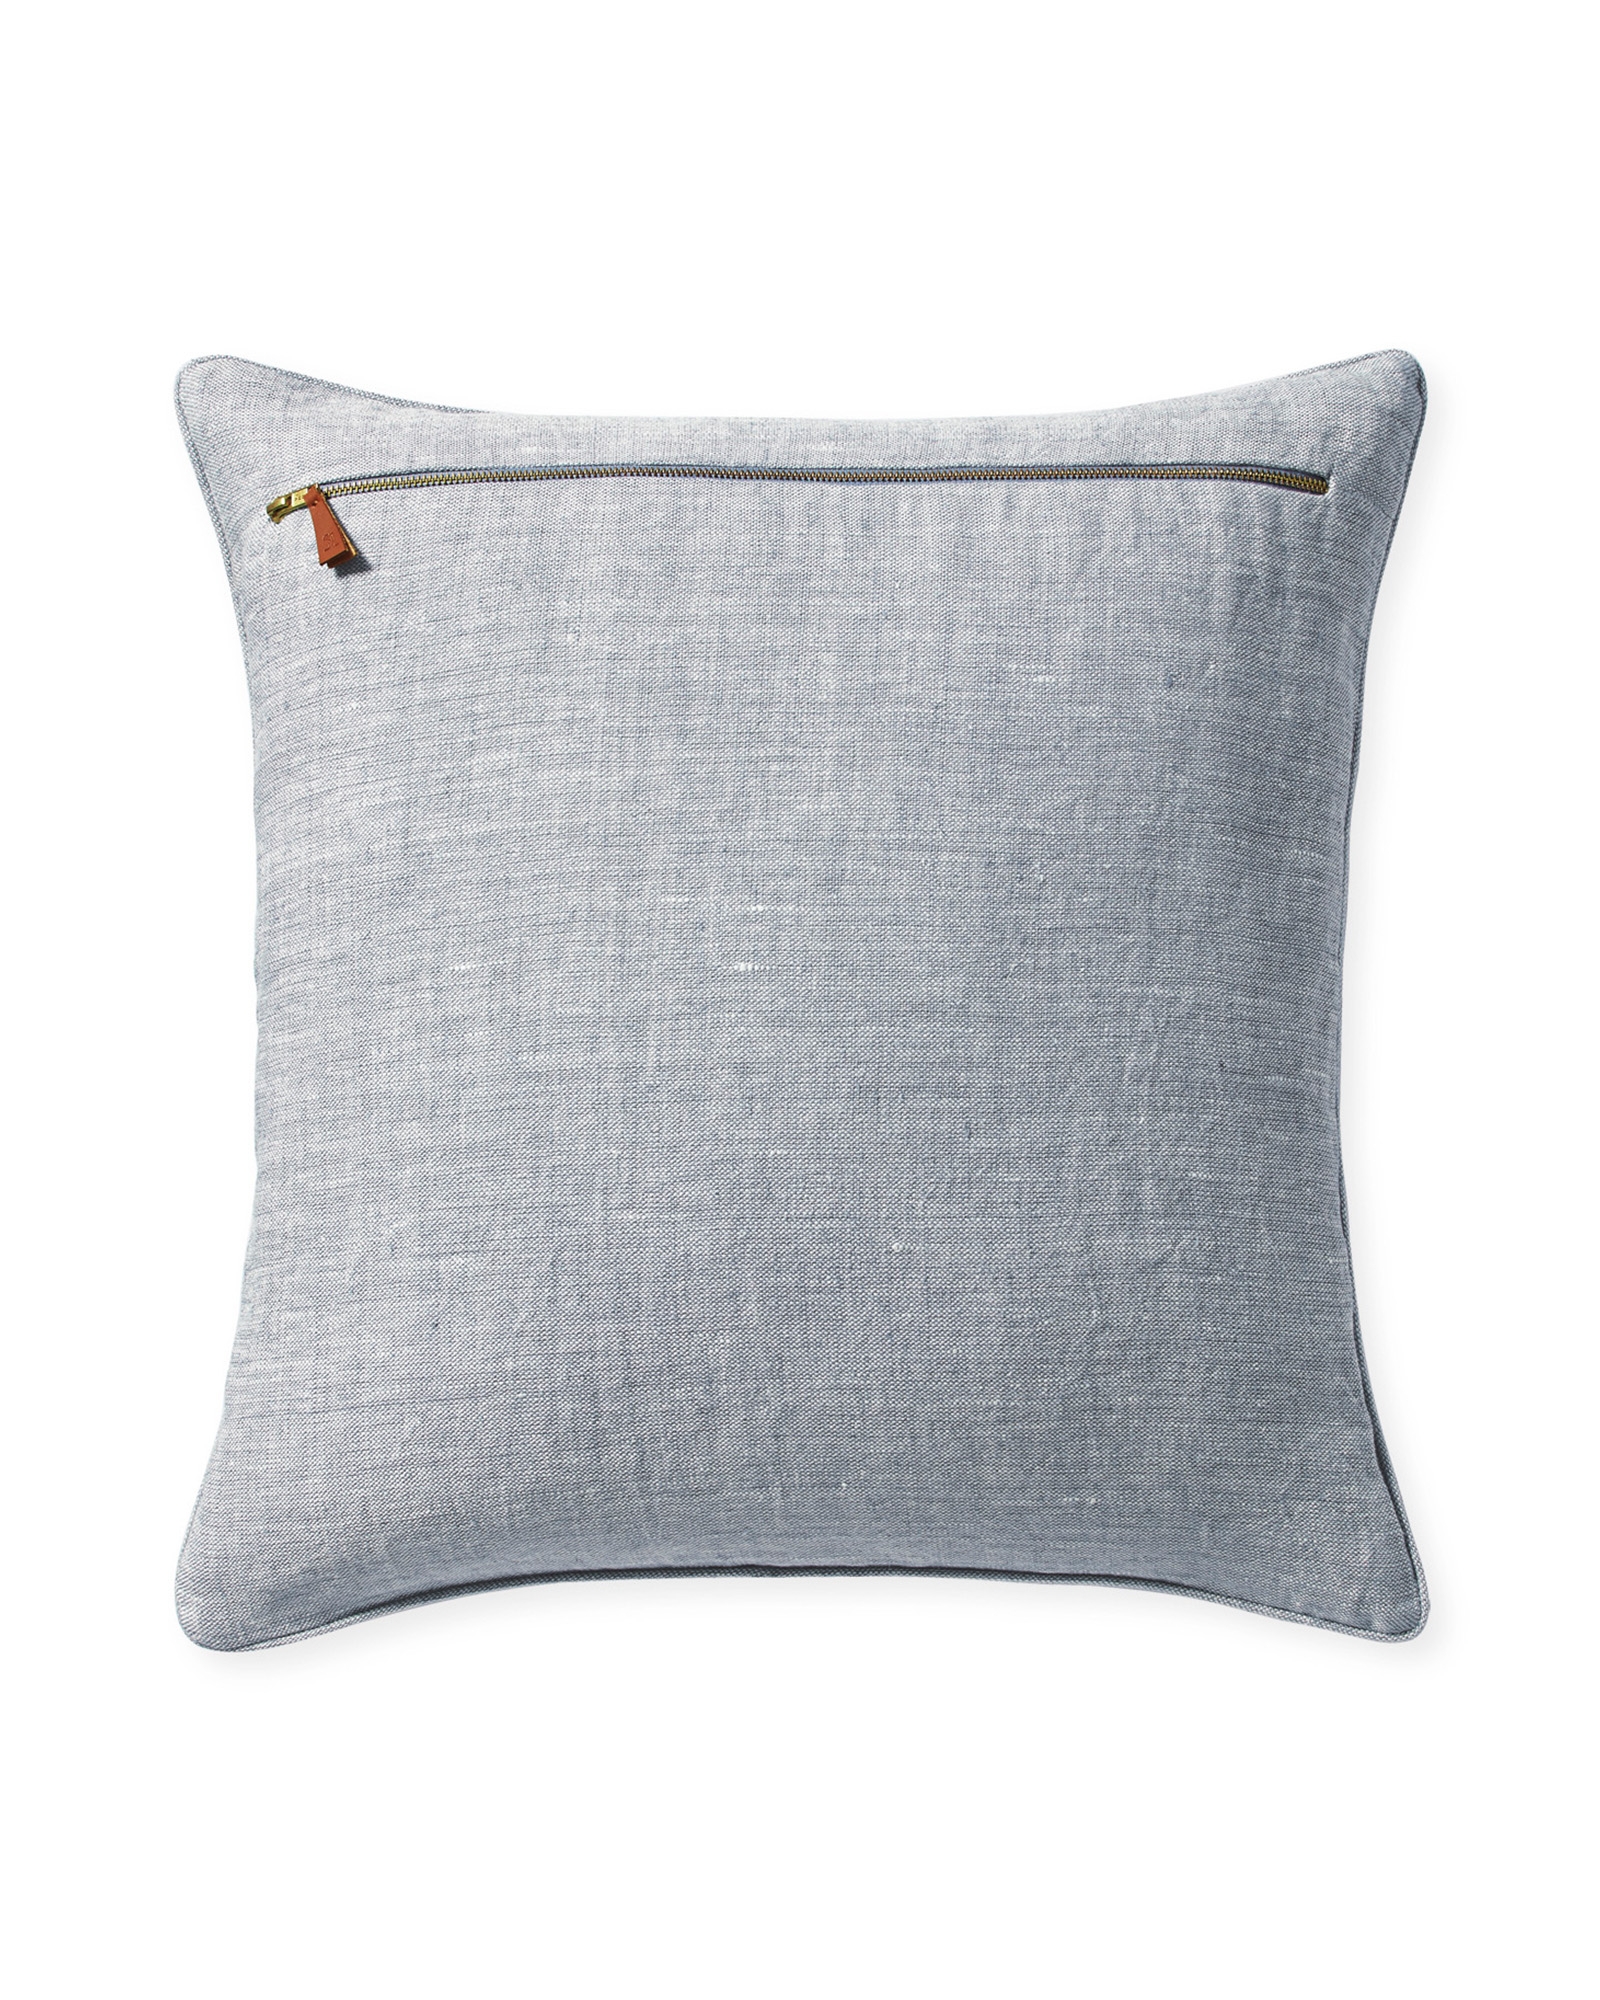 Lewes Pillow Cover - Image 1